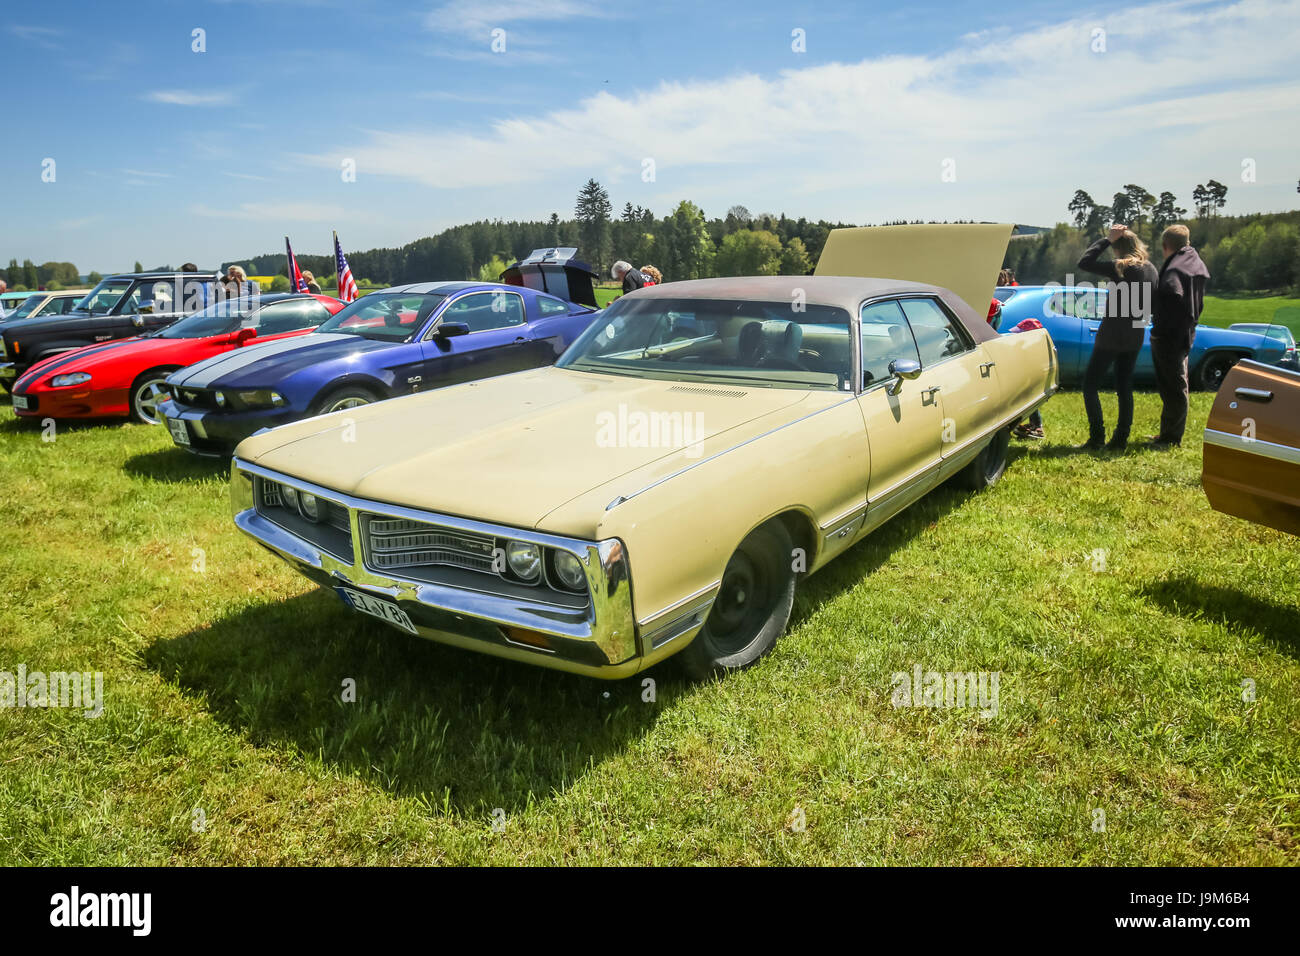 NANDLSTADT, GERMANY - MAY 6, 2017 : People sightseeing american automobile Chrysler displayed at the US Car meeting in Nandlstadt, Germany. Stock Photo